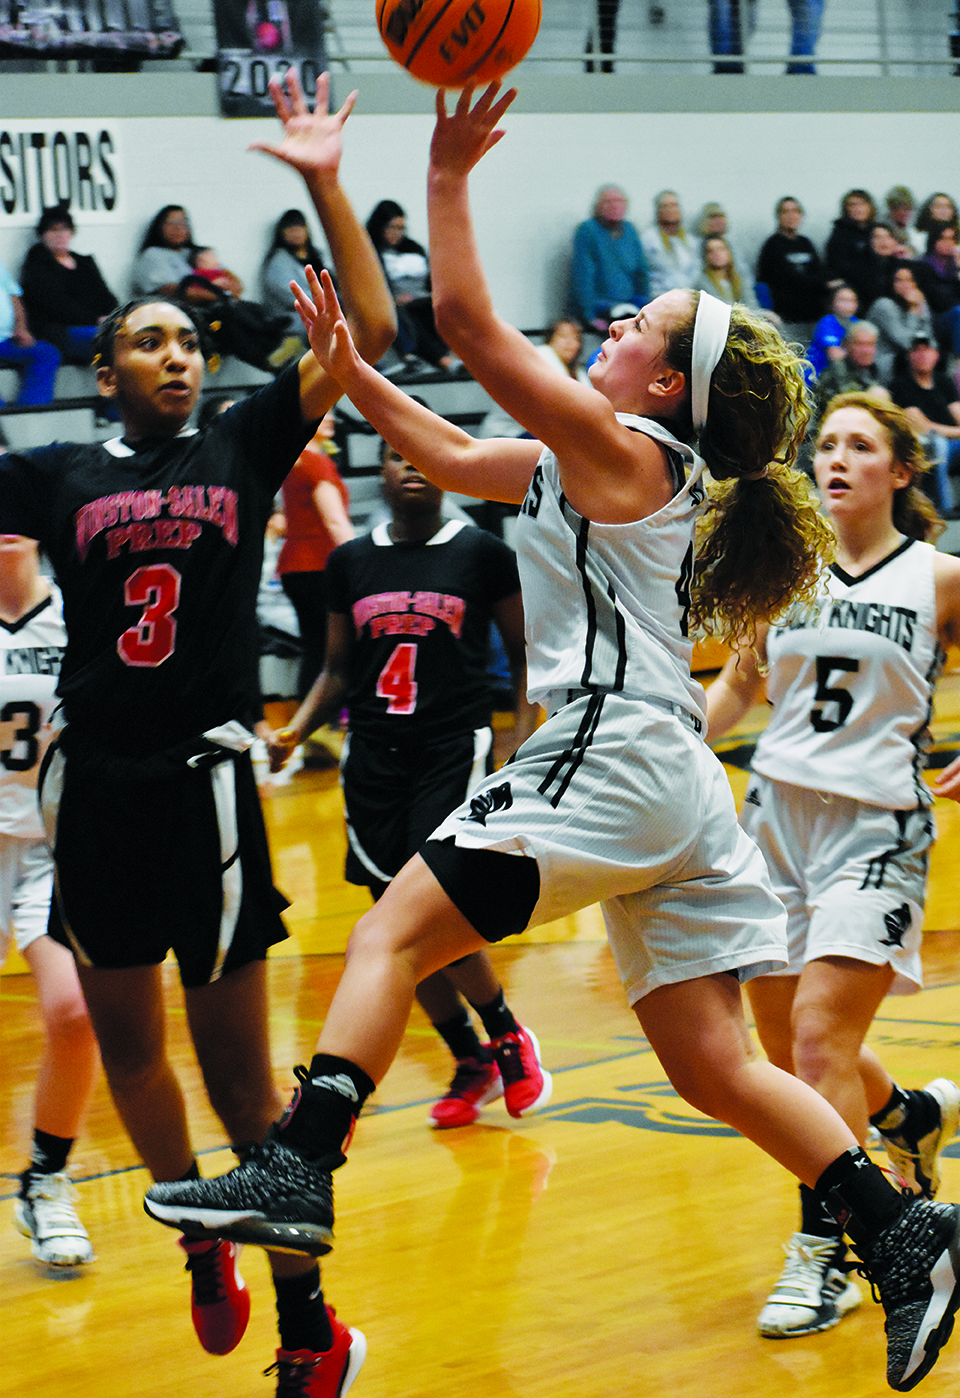 Robbinsville’s Desta Trammell takes flight during the first-half of Tuesday’s home playoff game against Winston-Salem Prep. Trammell led the Lady Knights with 15 points in the win. Photo by Kevin Hensley/editor@grahamstar.com